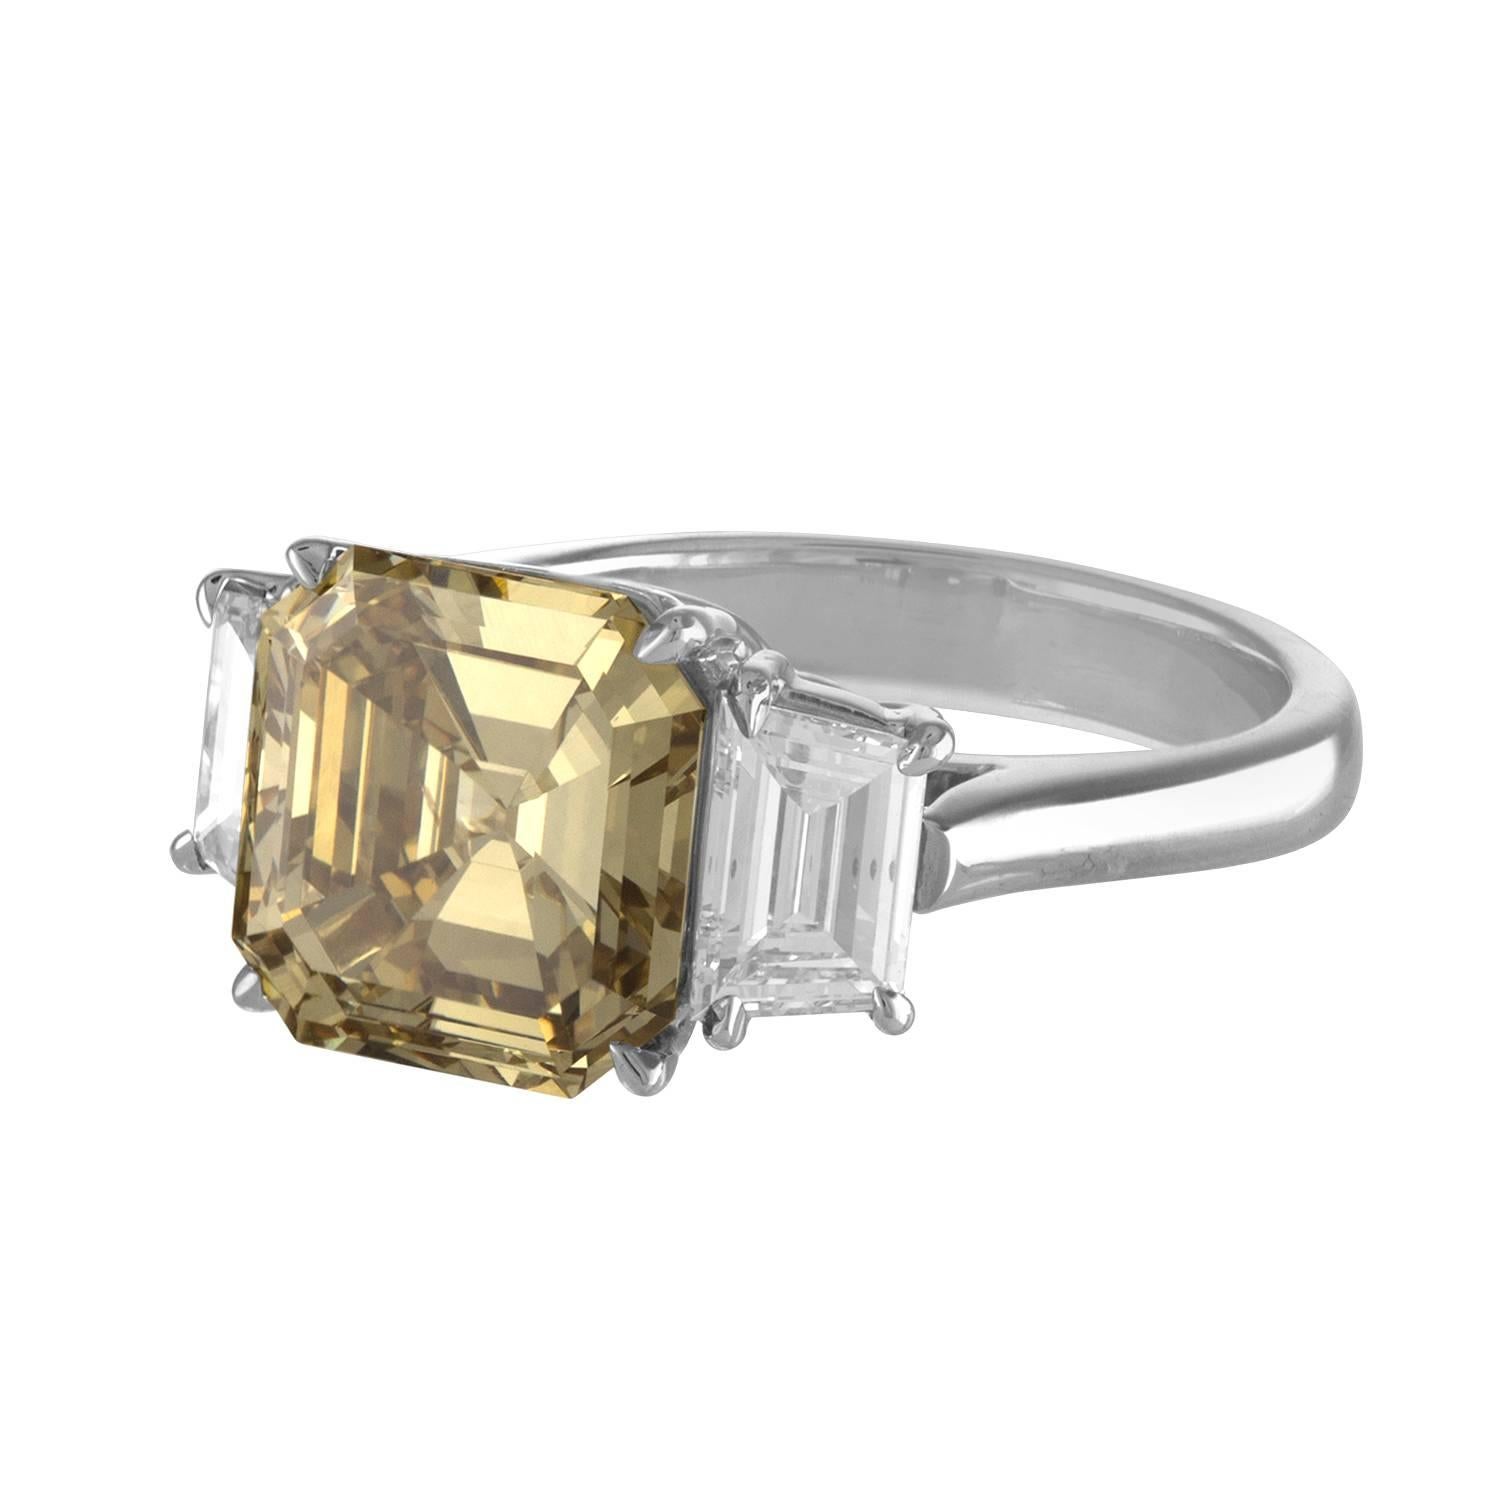 Contemporary 4.76 Carat Square Emerald Cut, GIA Certified, Set in Three-Stone Two-Tone Ring